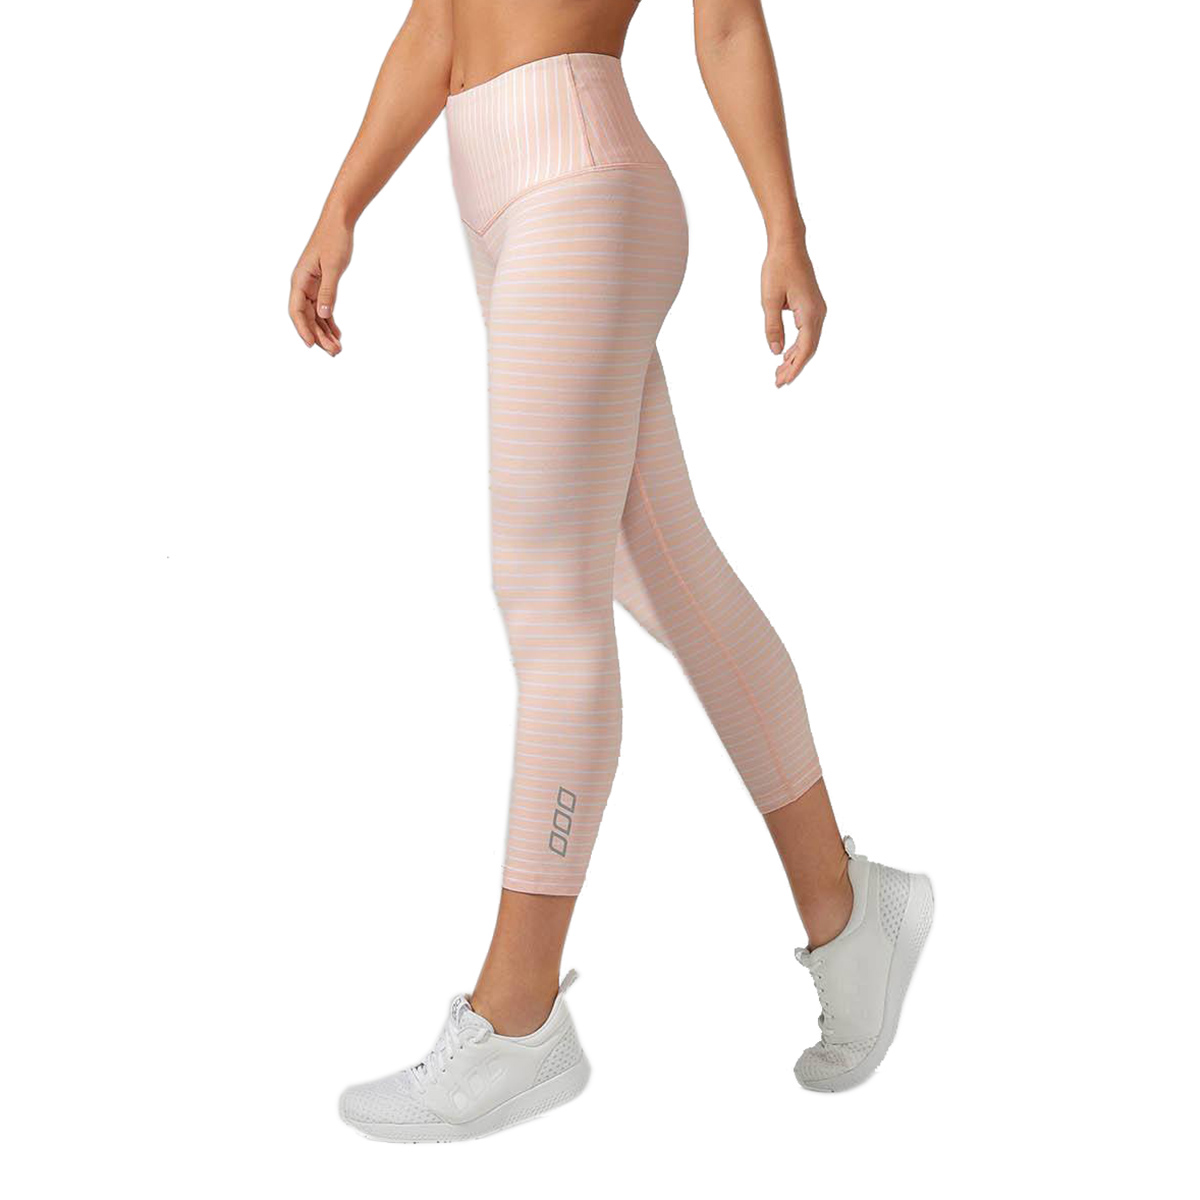 Lorna Jane Venice Stripe Core 7/8 Tight, , large image number null